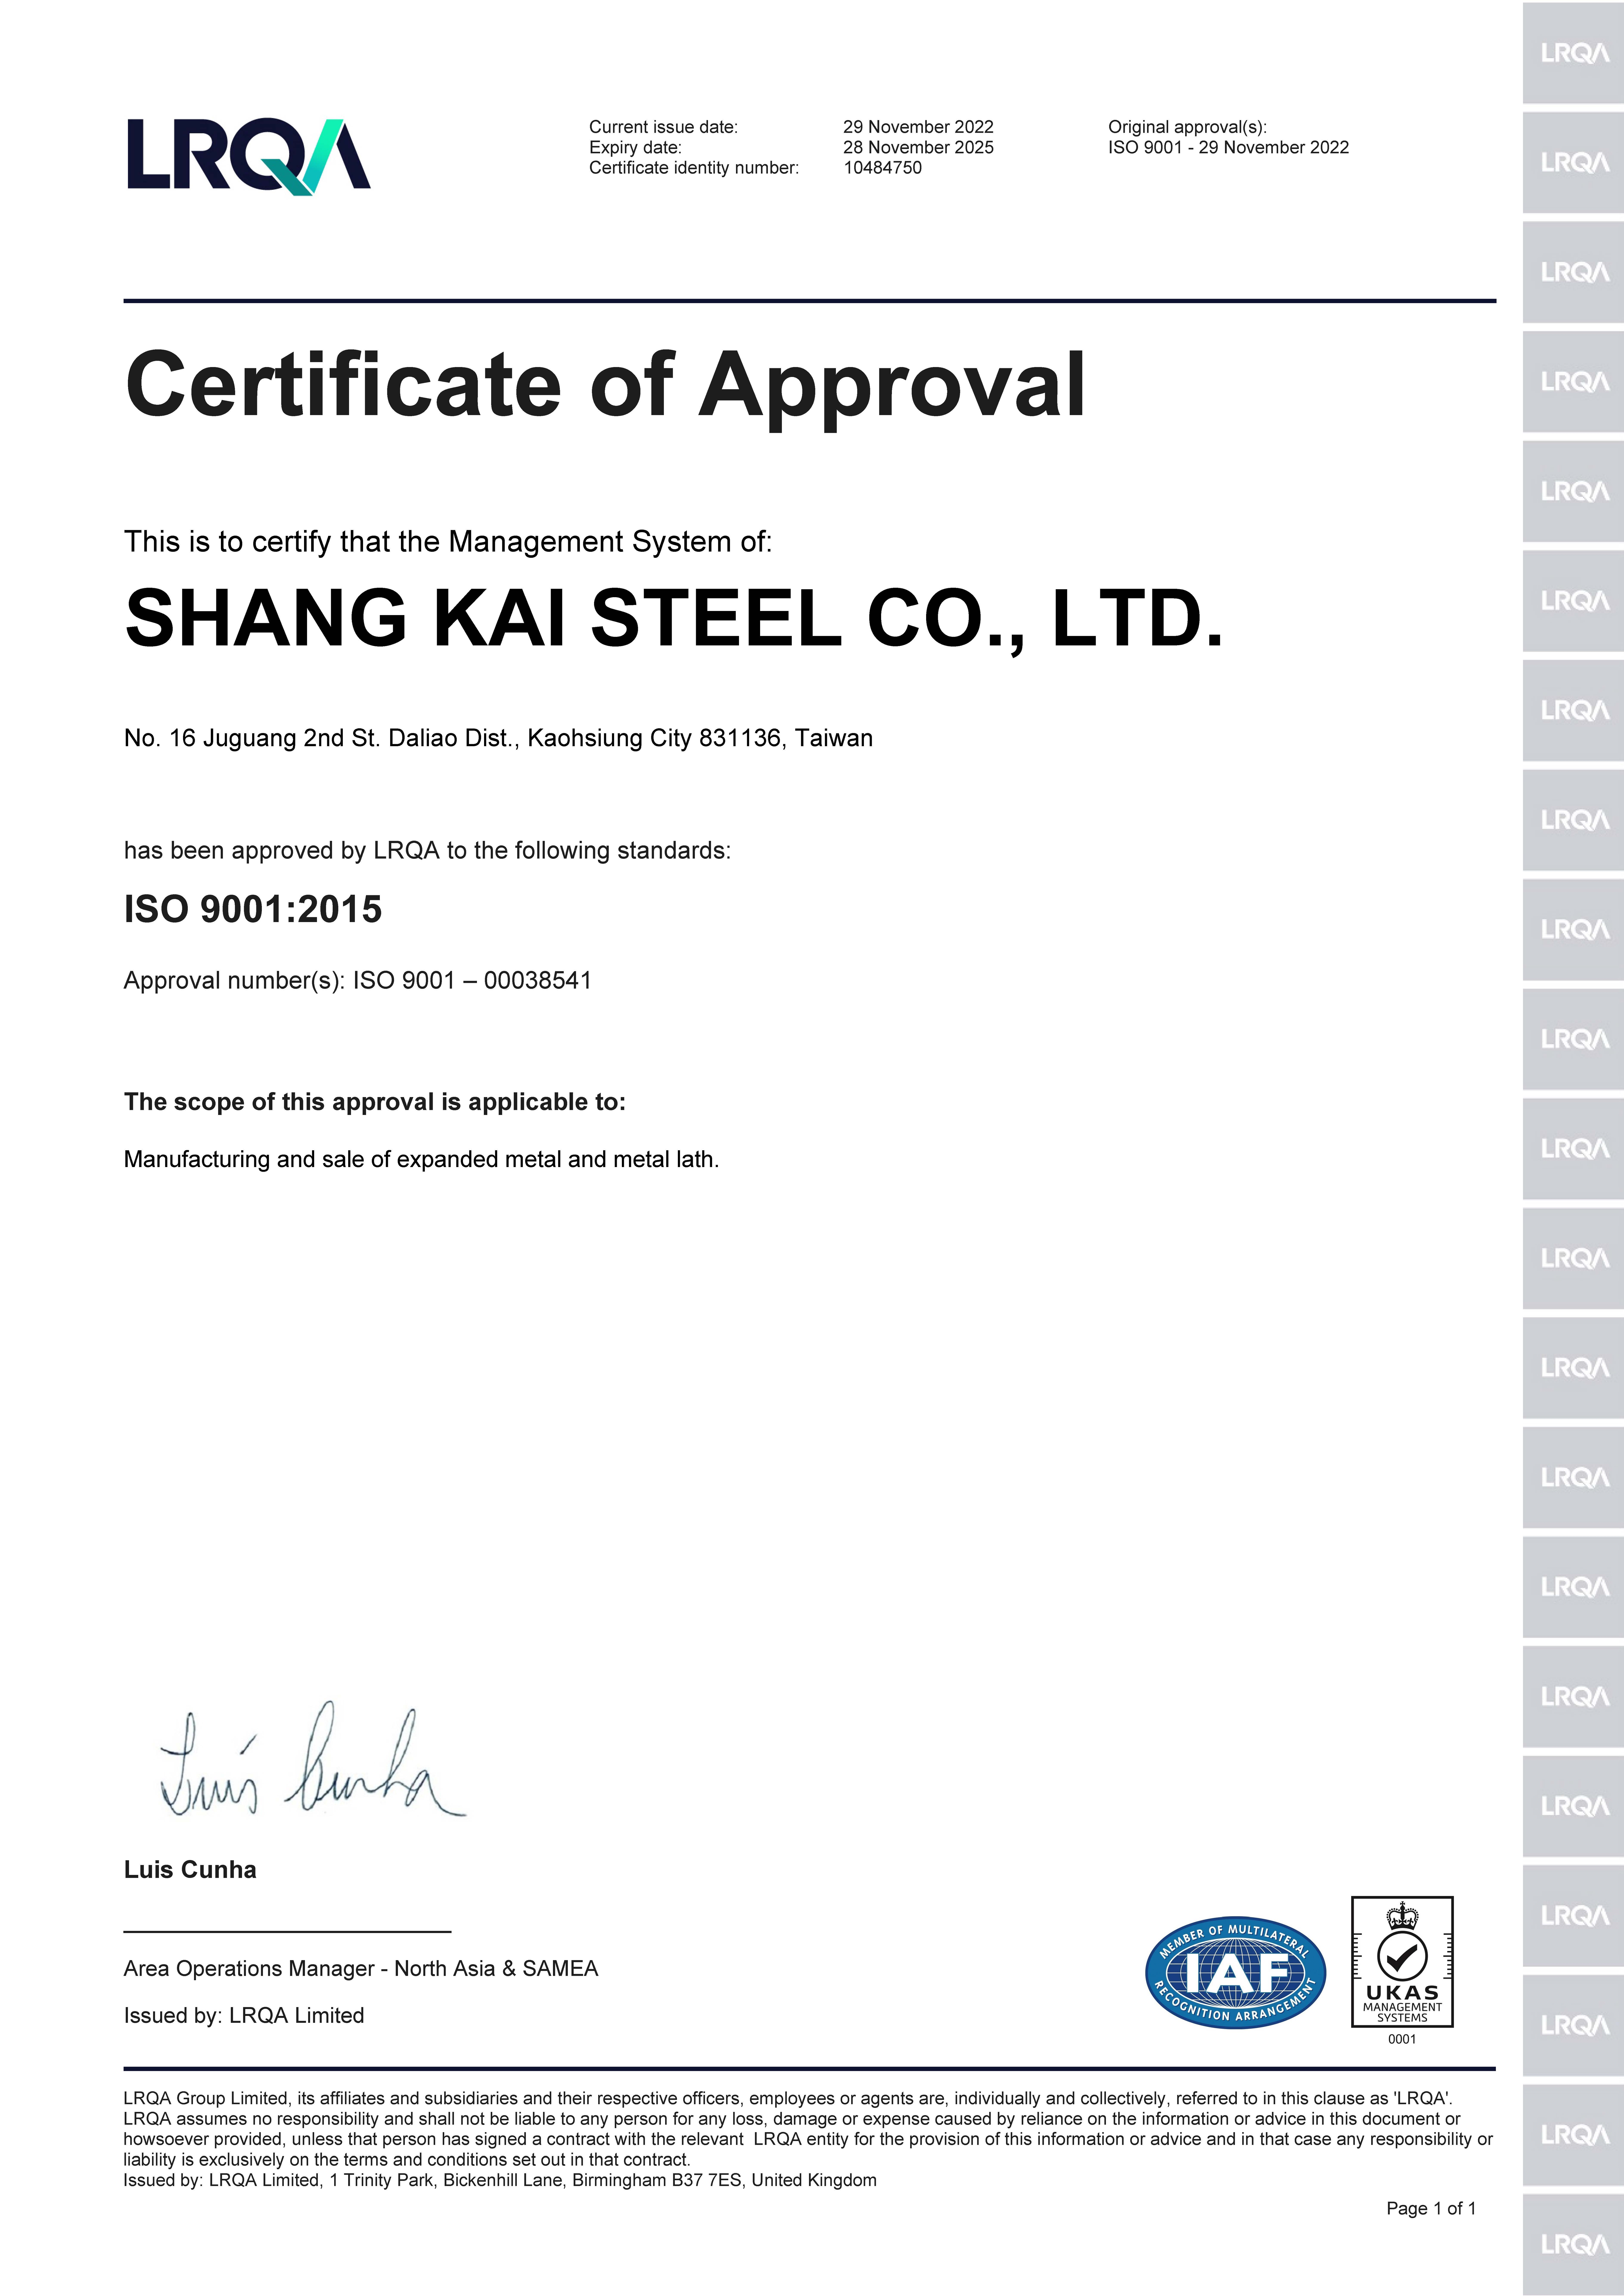 SHANG KAI STEEL Is Certified LRQA ISO 9001:2015 certification.